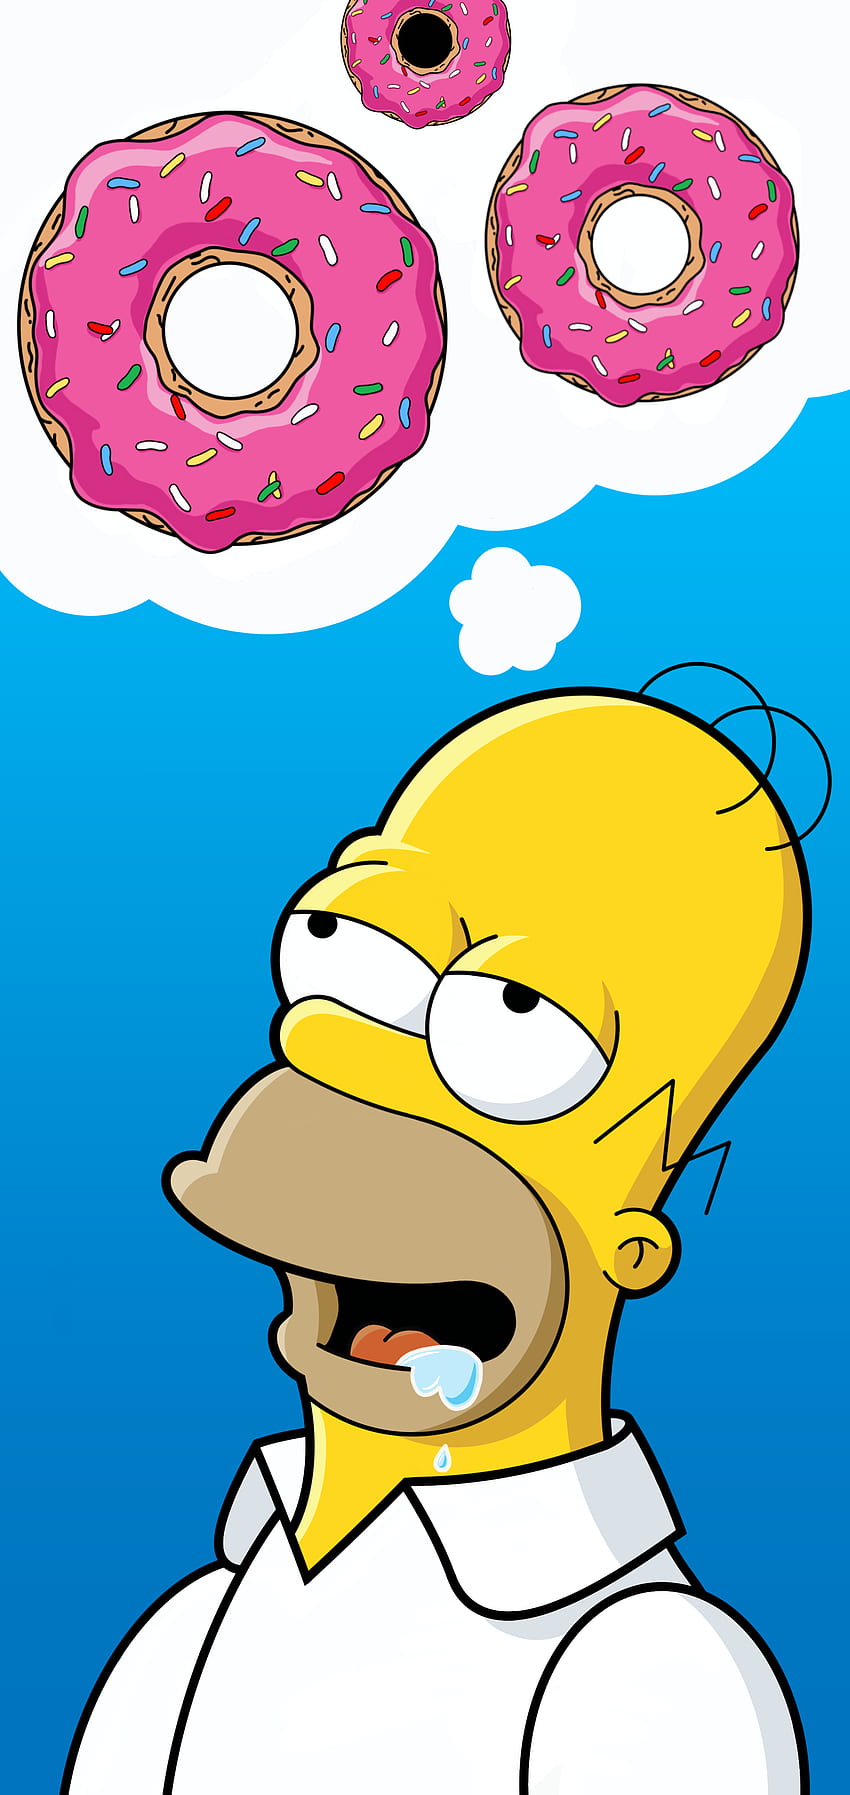 Homer Simpson Dreams of Donuts by ranurr Galaxy Note 10 HD phone wallpaper